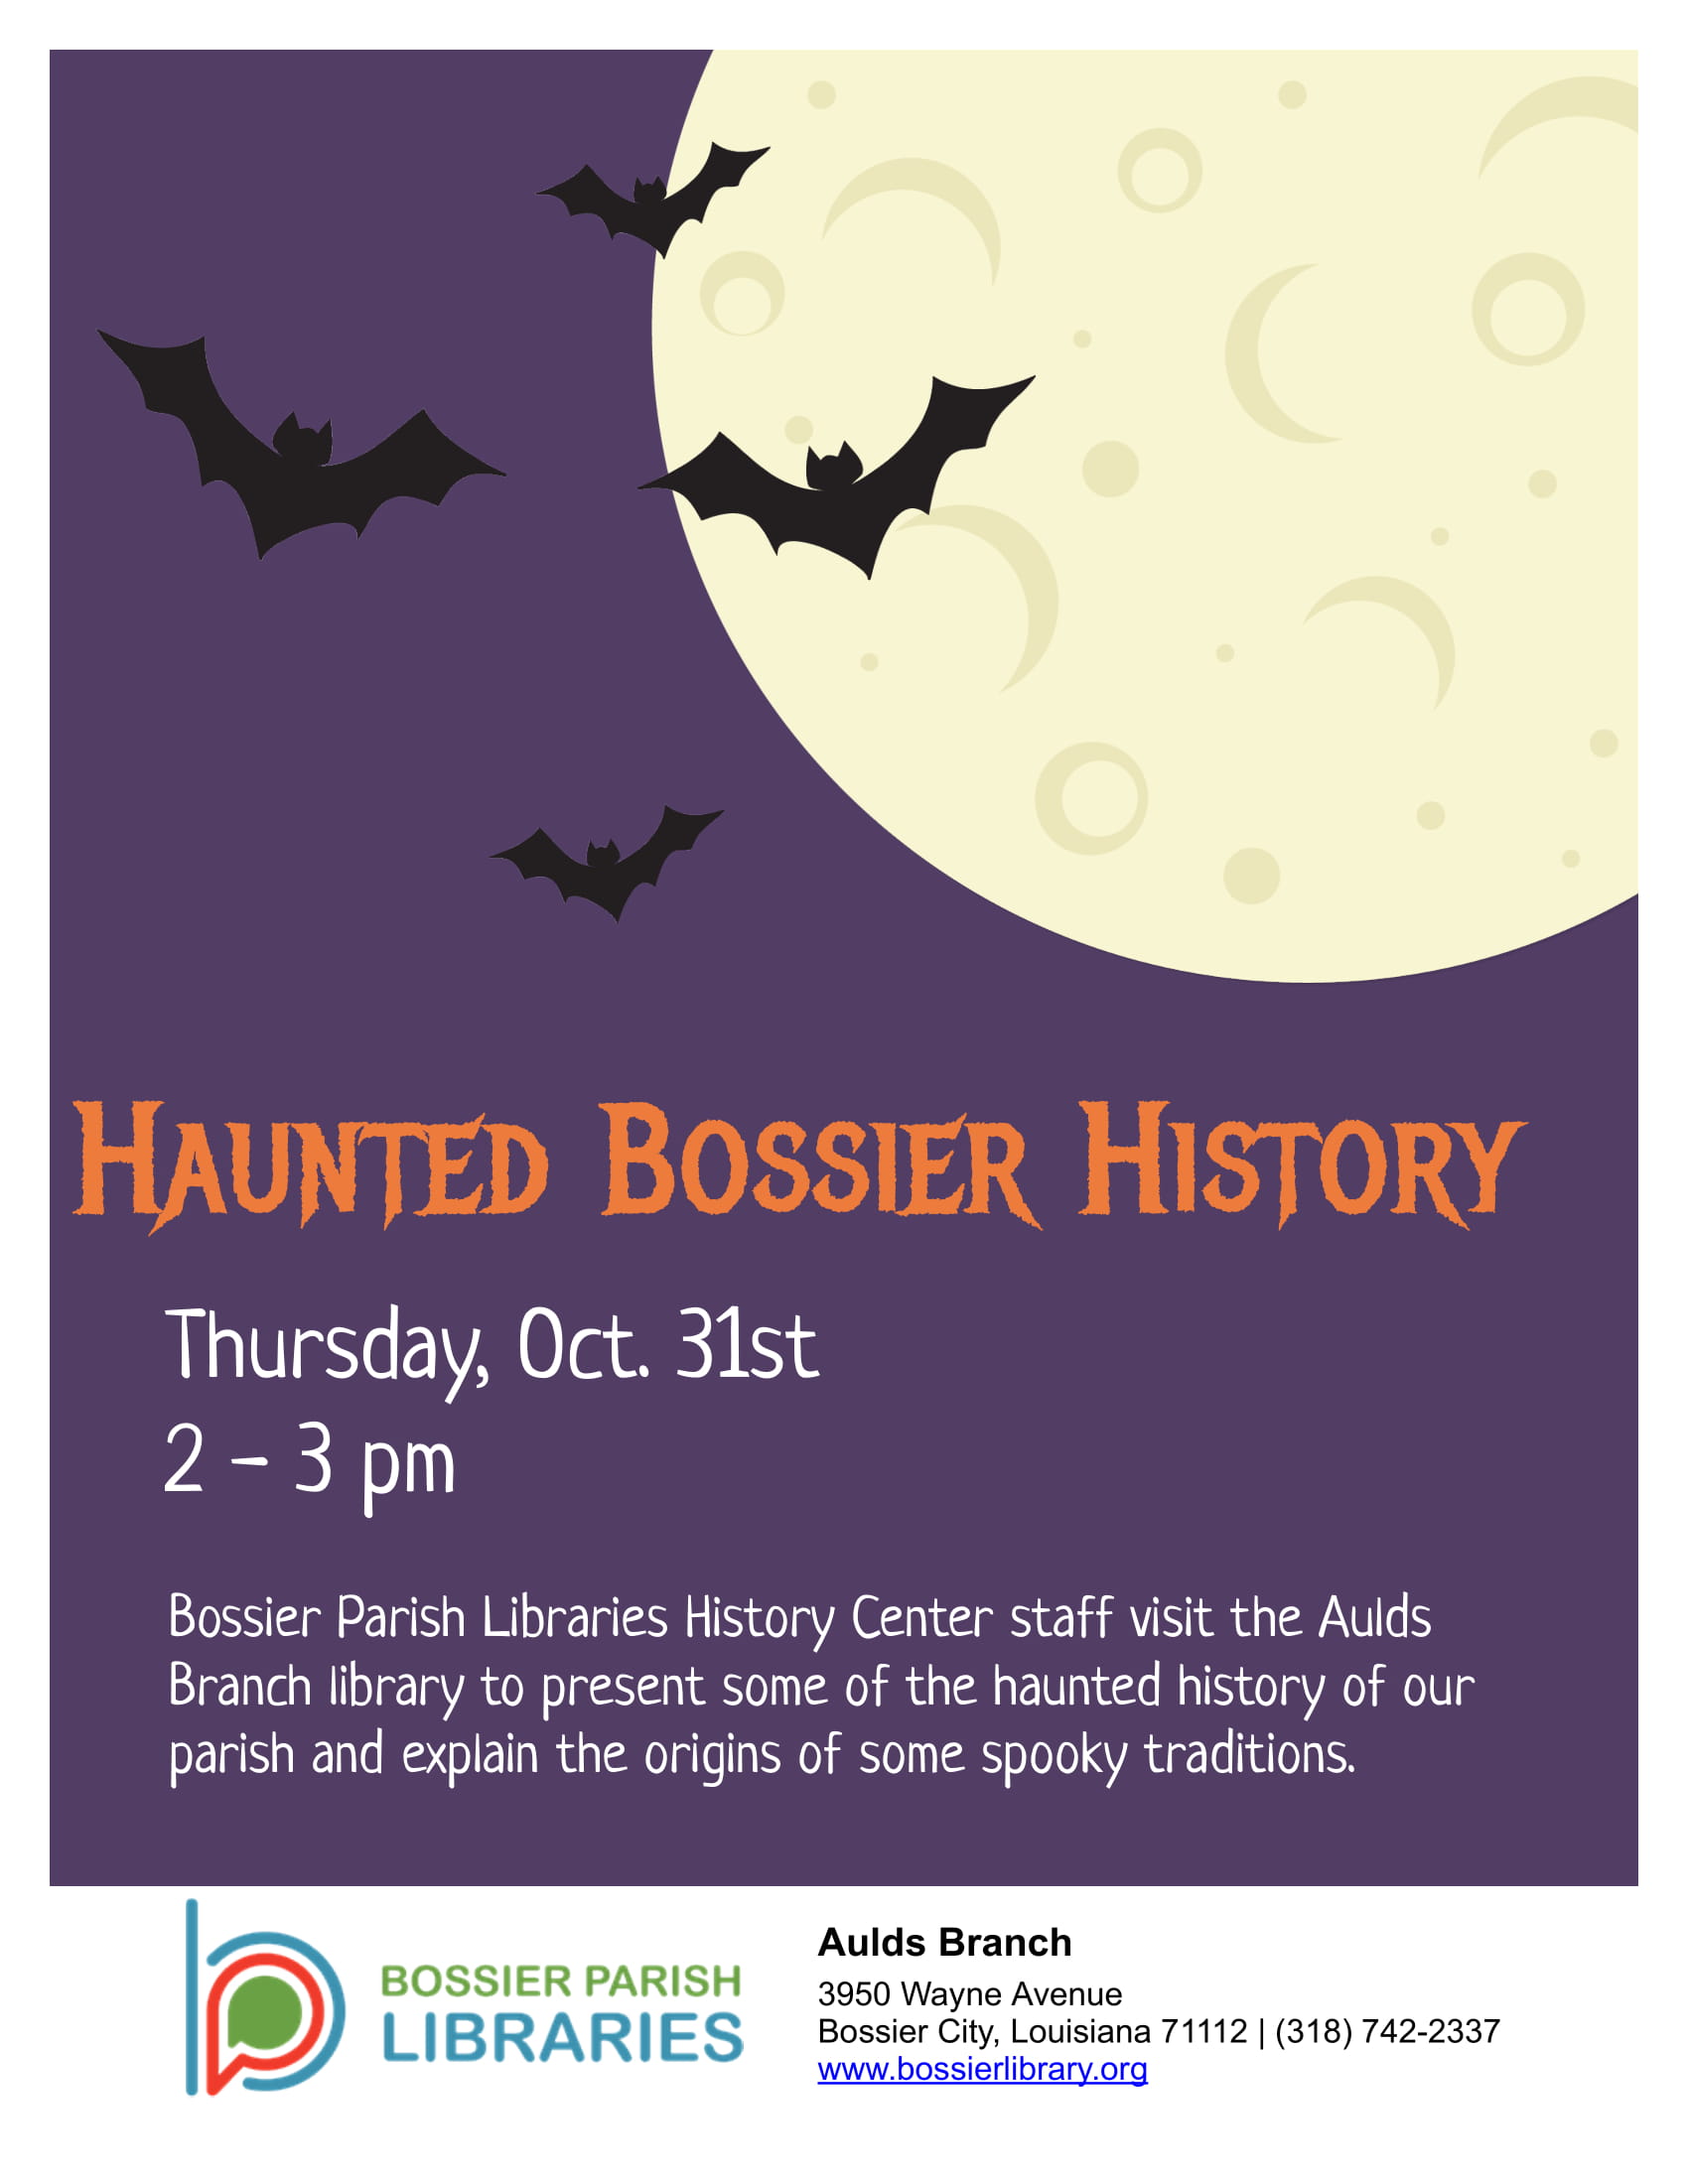 Flyer for Haunted Bossier History program, shows bats flying in front of moon